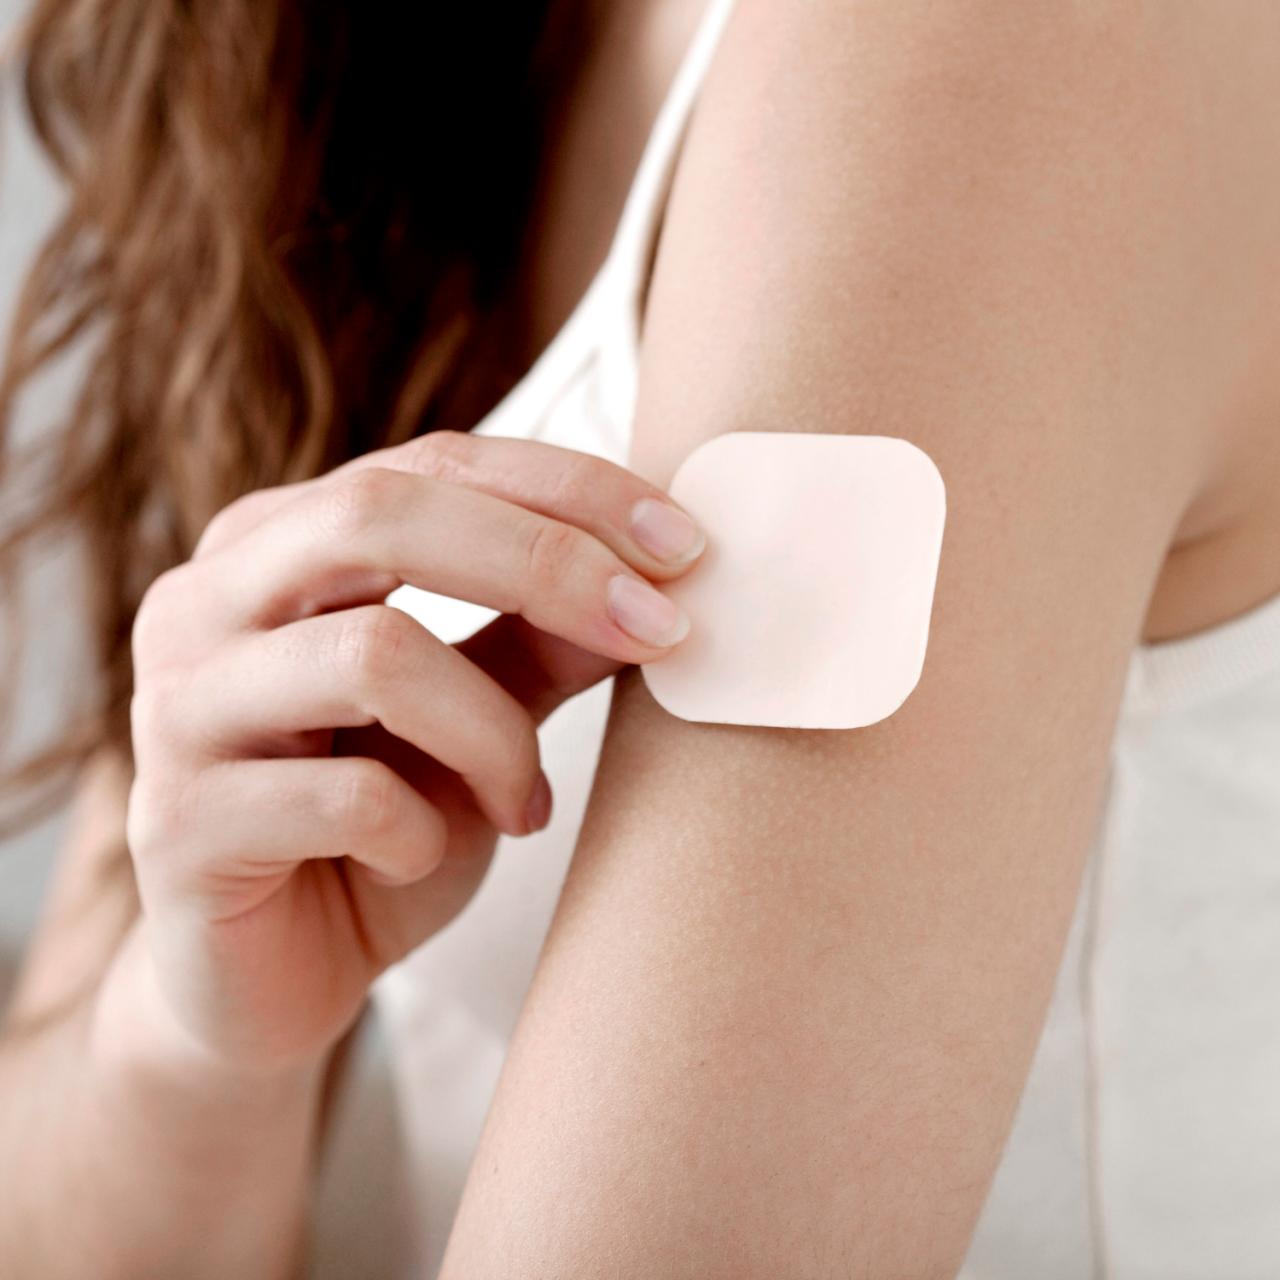 The Patch Brand Vitamin Patches Powerful Wellness Patches You Can